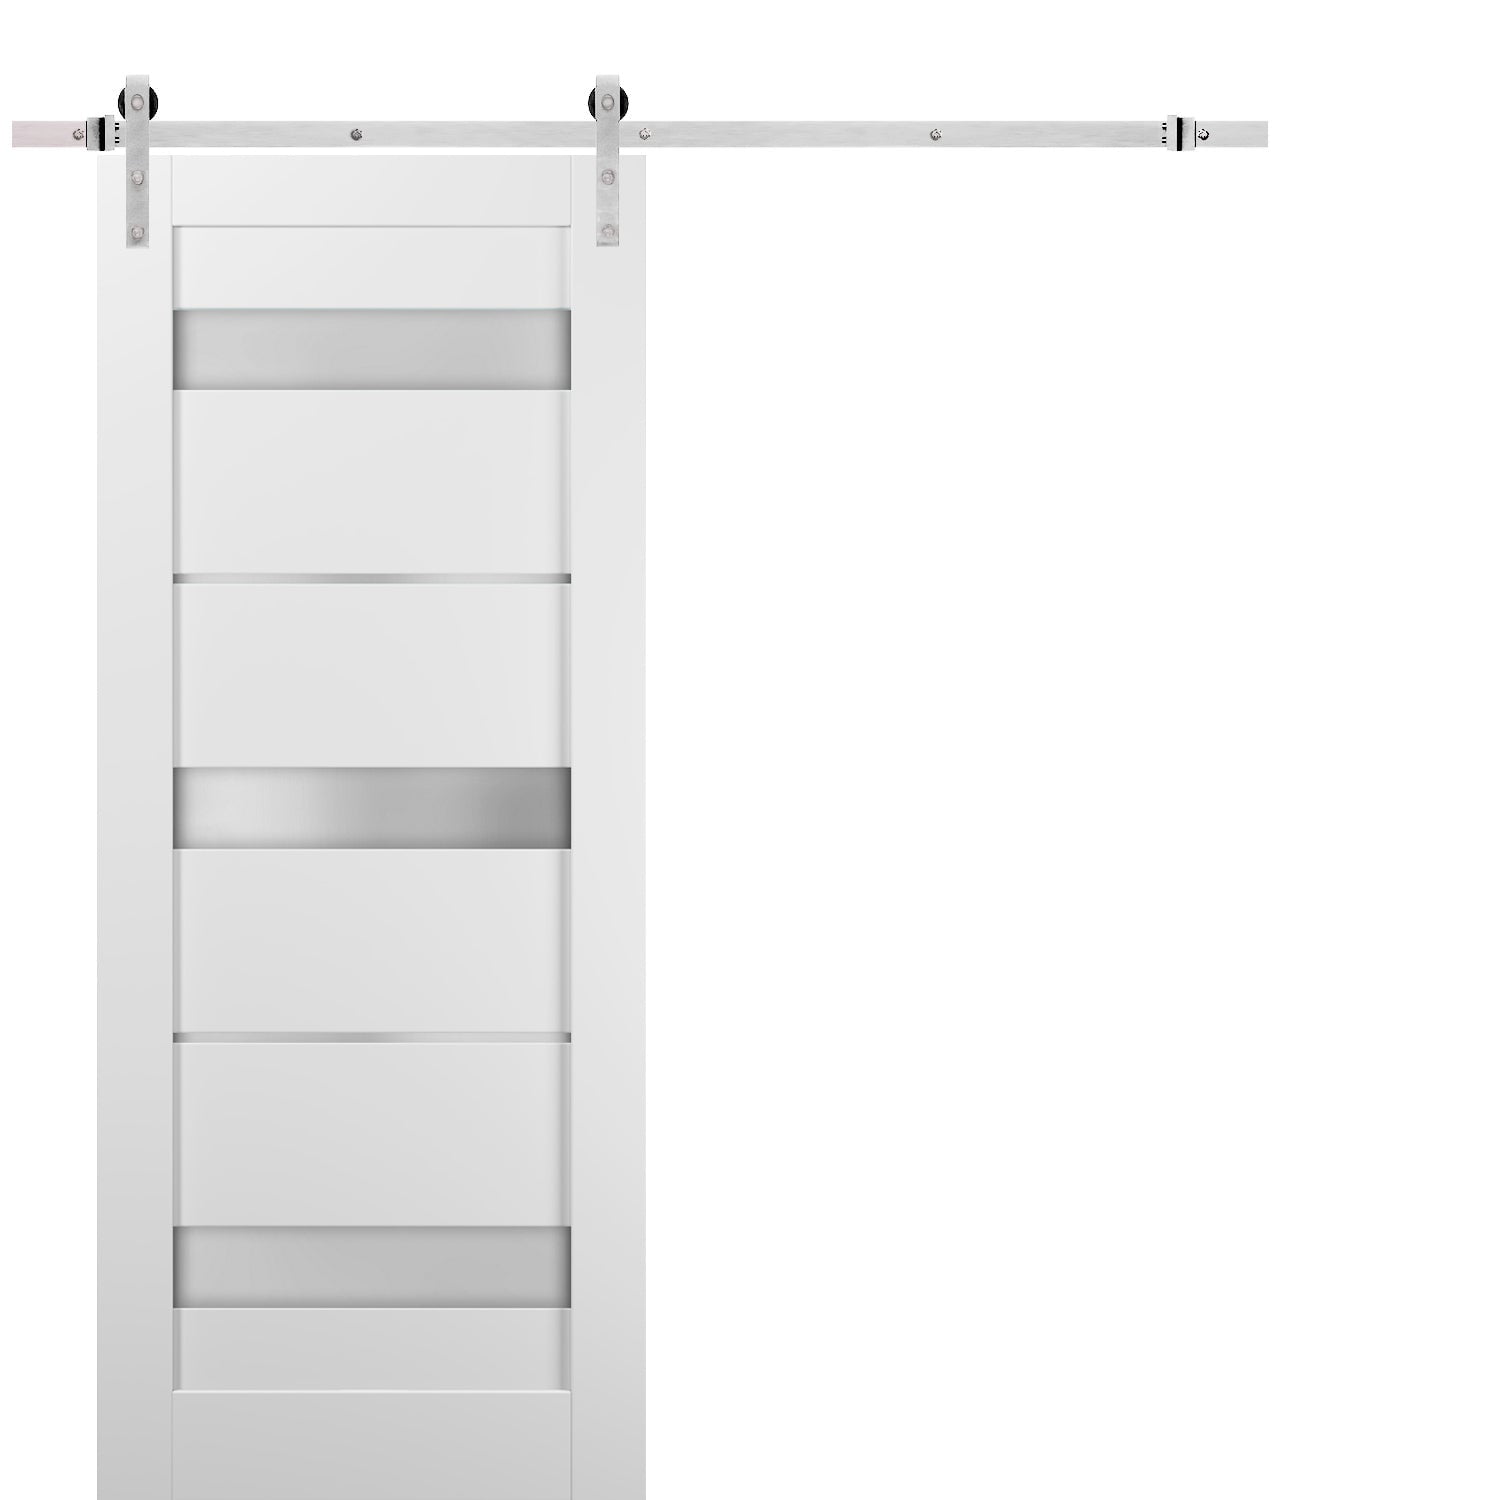 Sliding Barn Door 42 x 84 with Stainless Steel 8ft Hardware Quadro 4055  White Silk with Frosted Opaque Glass Top Mount Rail Hangers Sturdy Silver  Set Lite Wooden Solid Panel Interior Doors